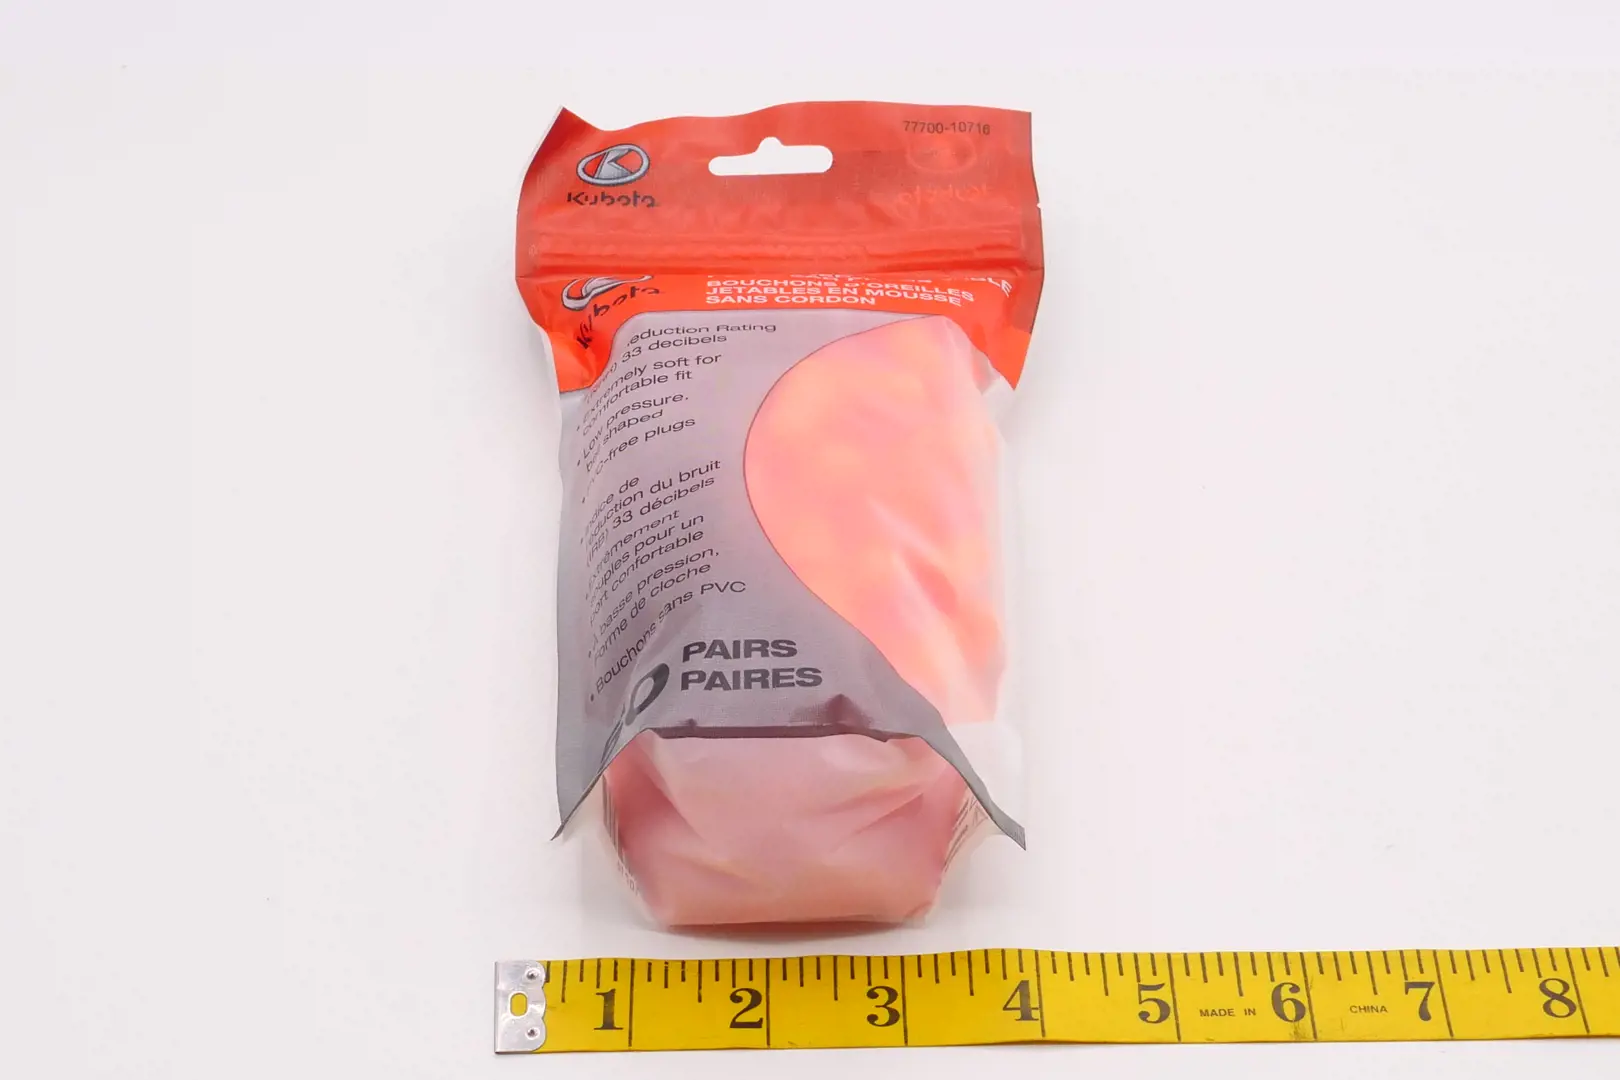 Image 3 for #77700-10716 Uncorded Disposable Foam Ear Plugs